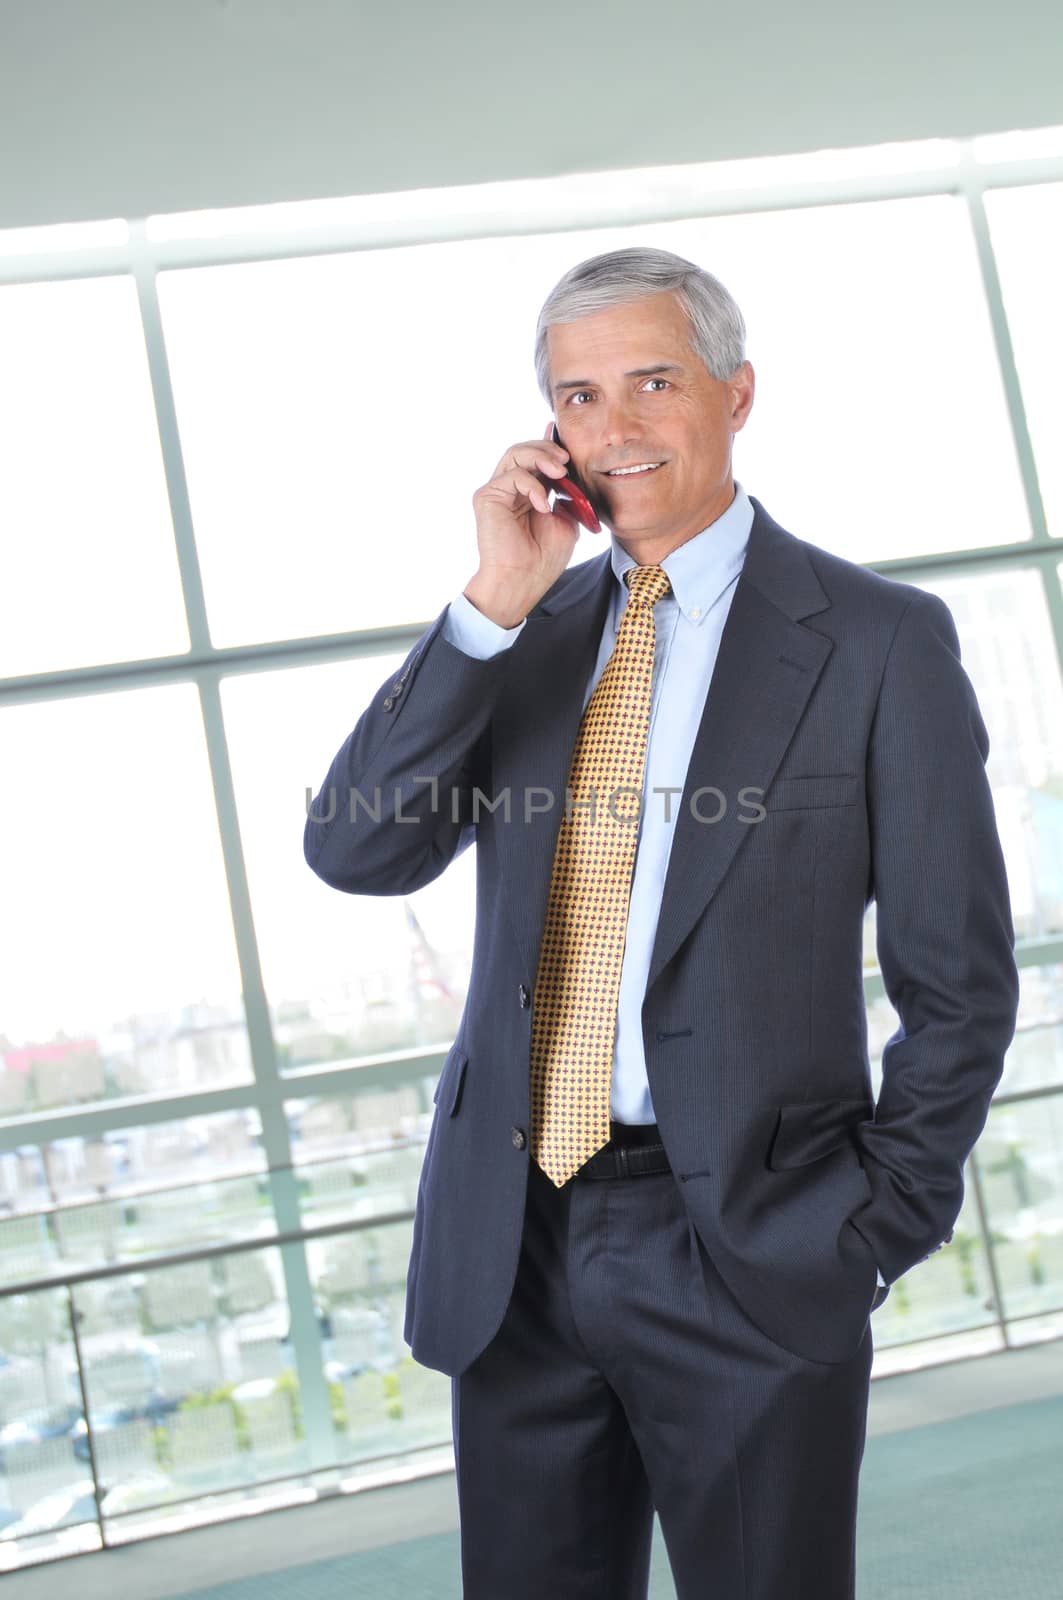 Standing Middle aged Businessman Talking on Cell Phone in Office Setting